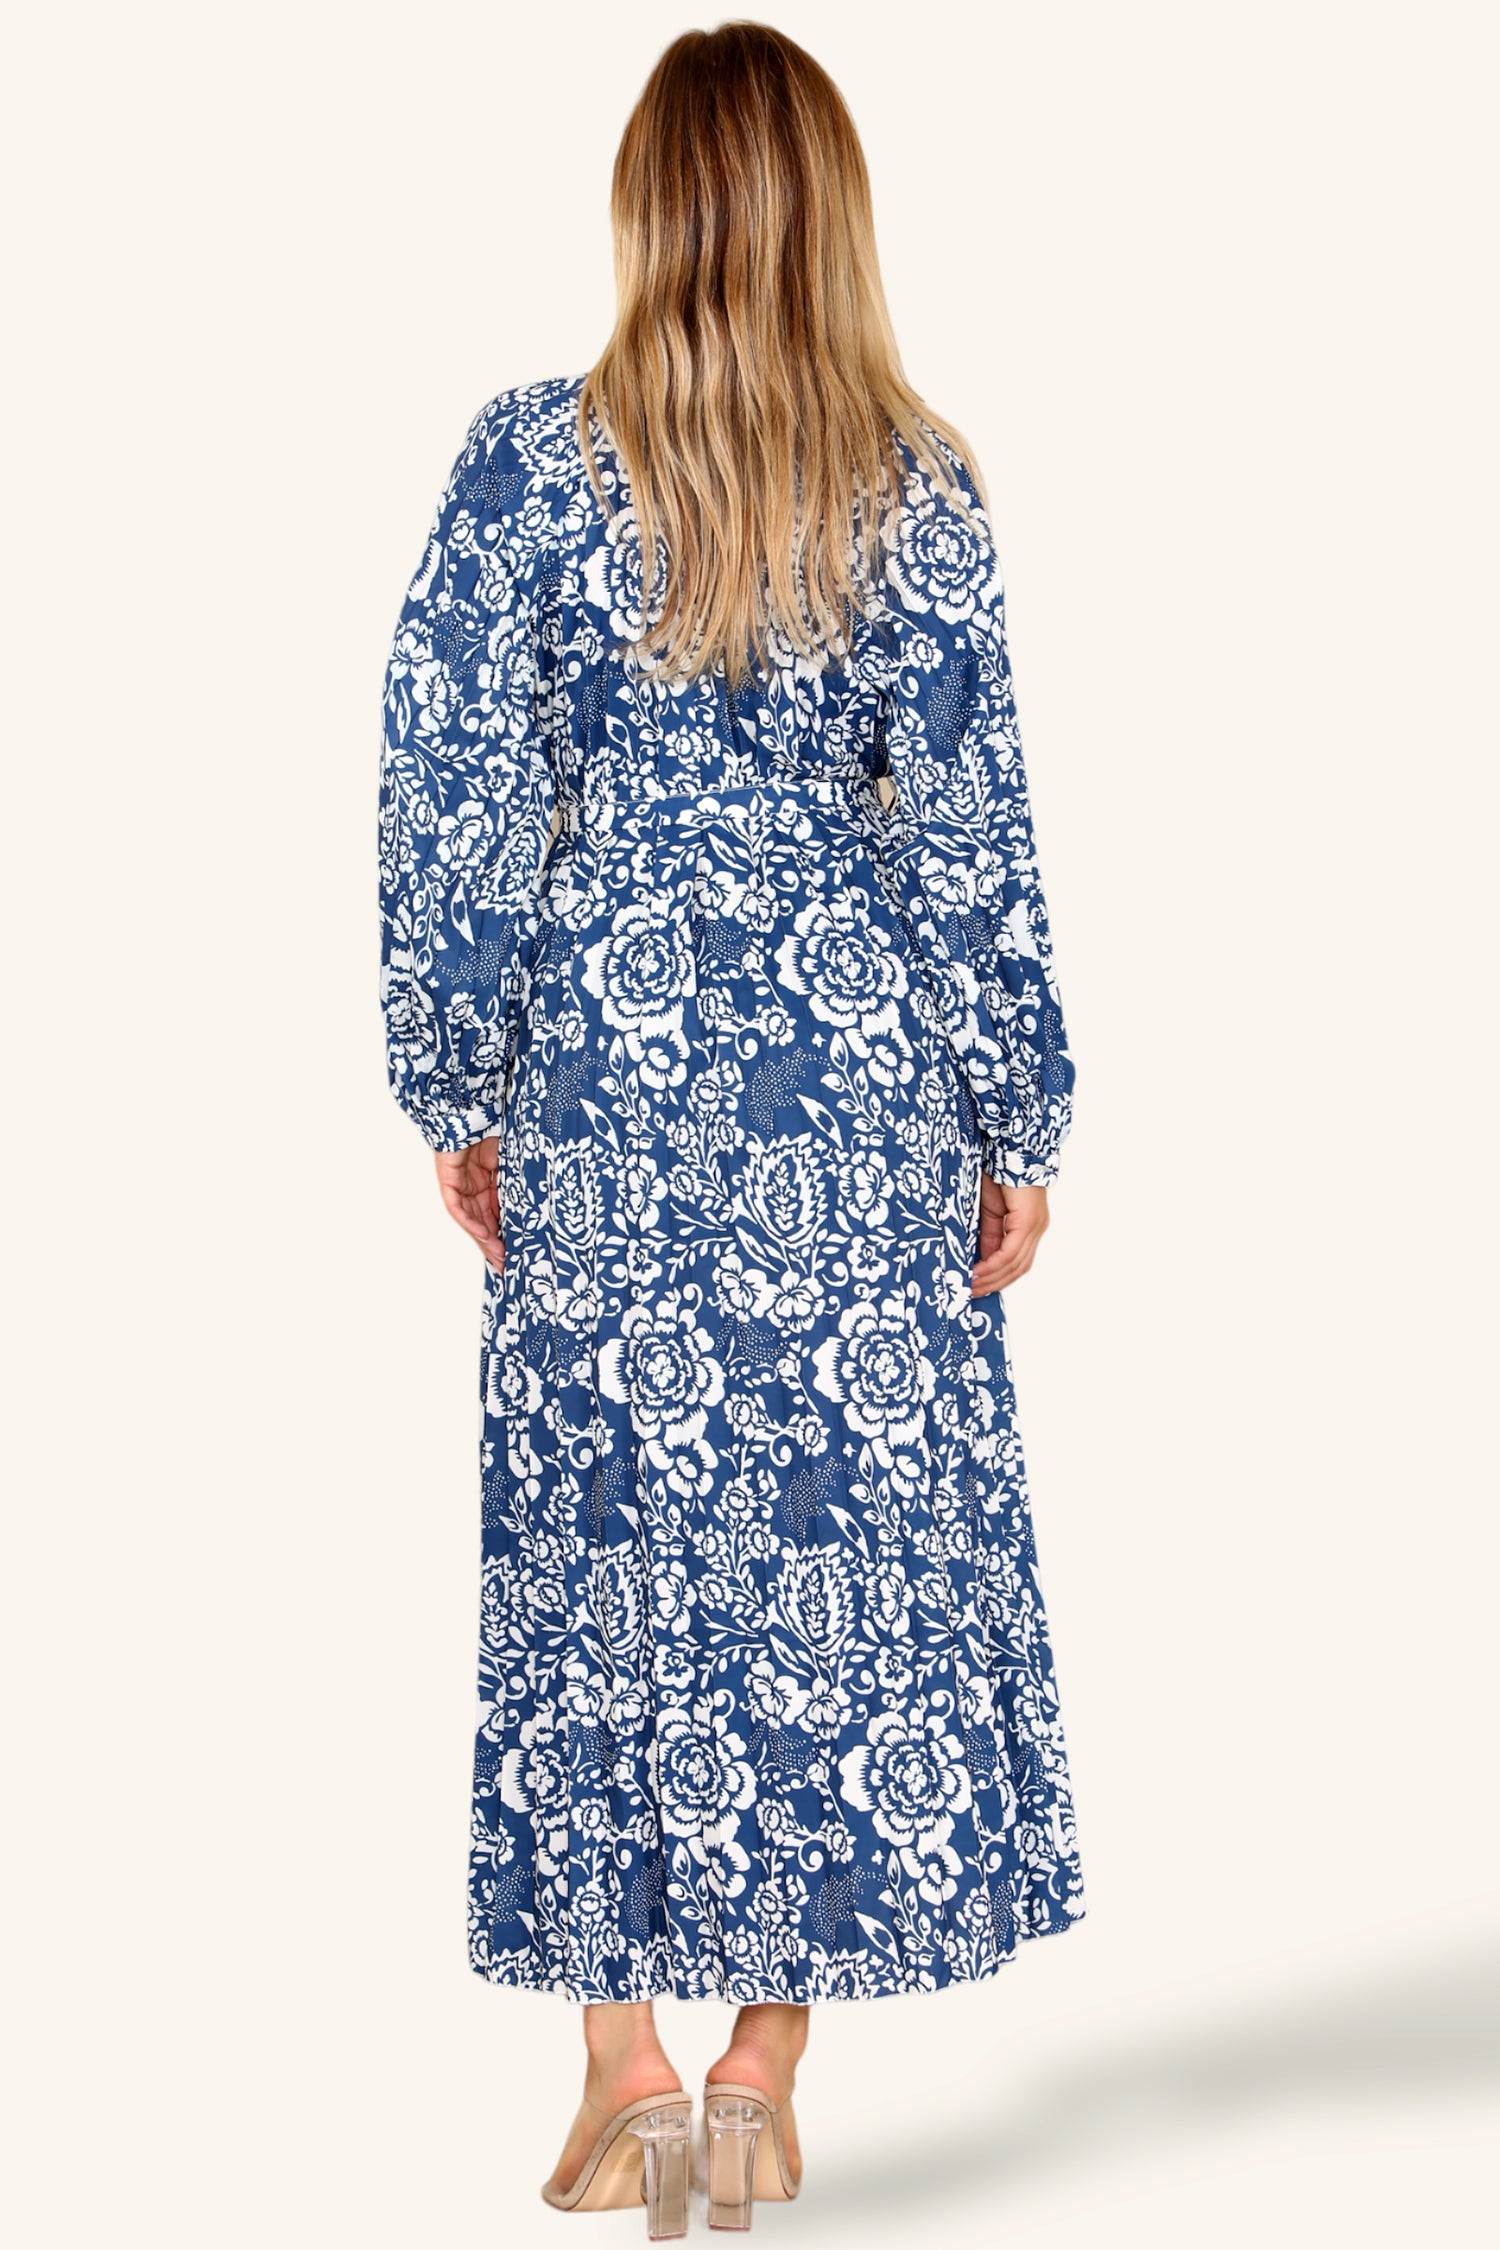 Blue Floral Printed Belted Pleated Maxi Dress LS-2329-WA5